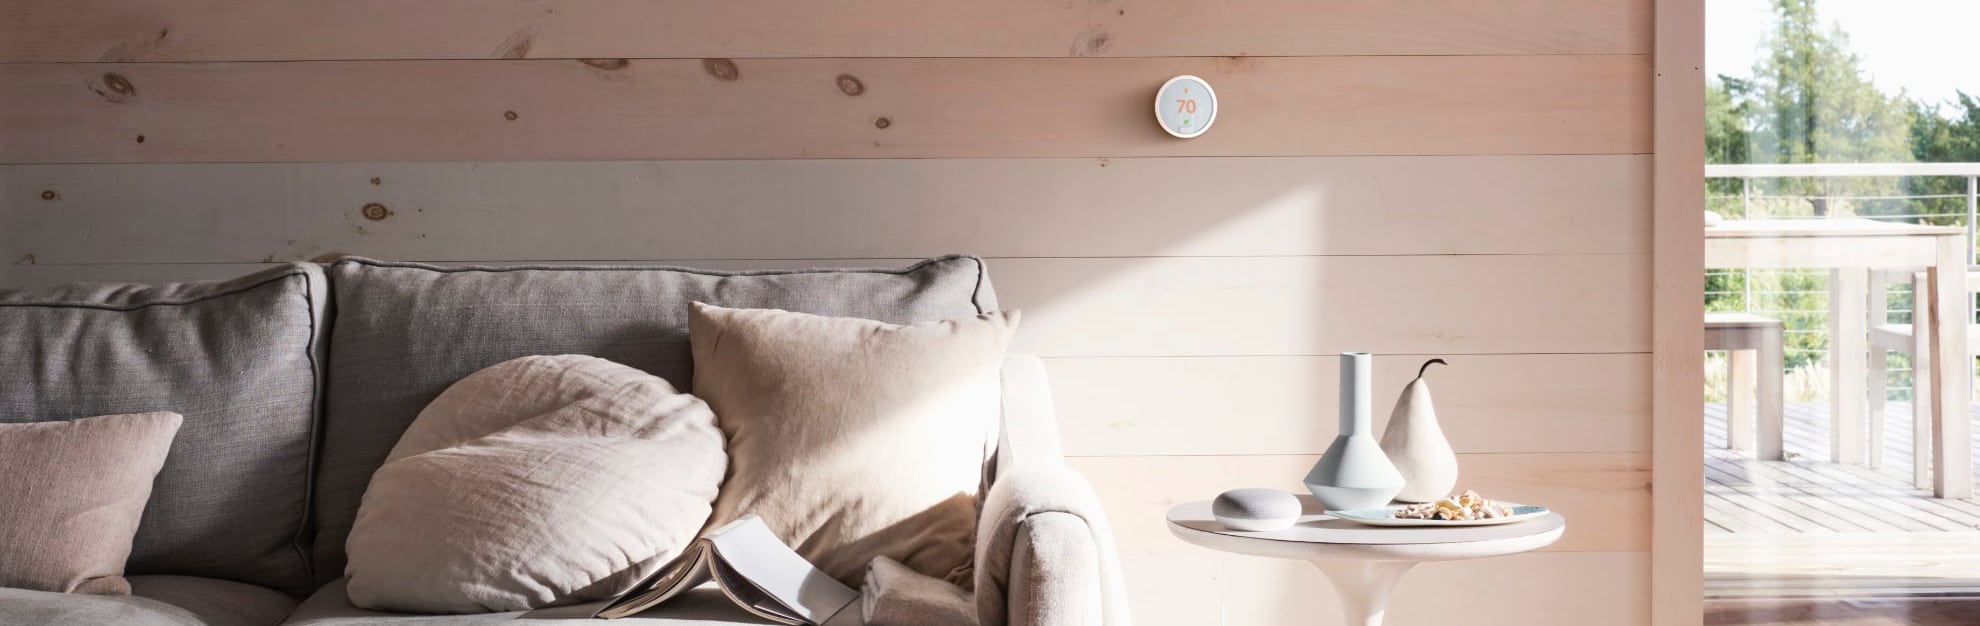 Vivint Home Automation in Morgantown